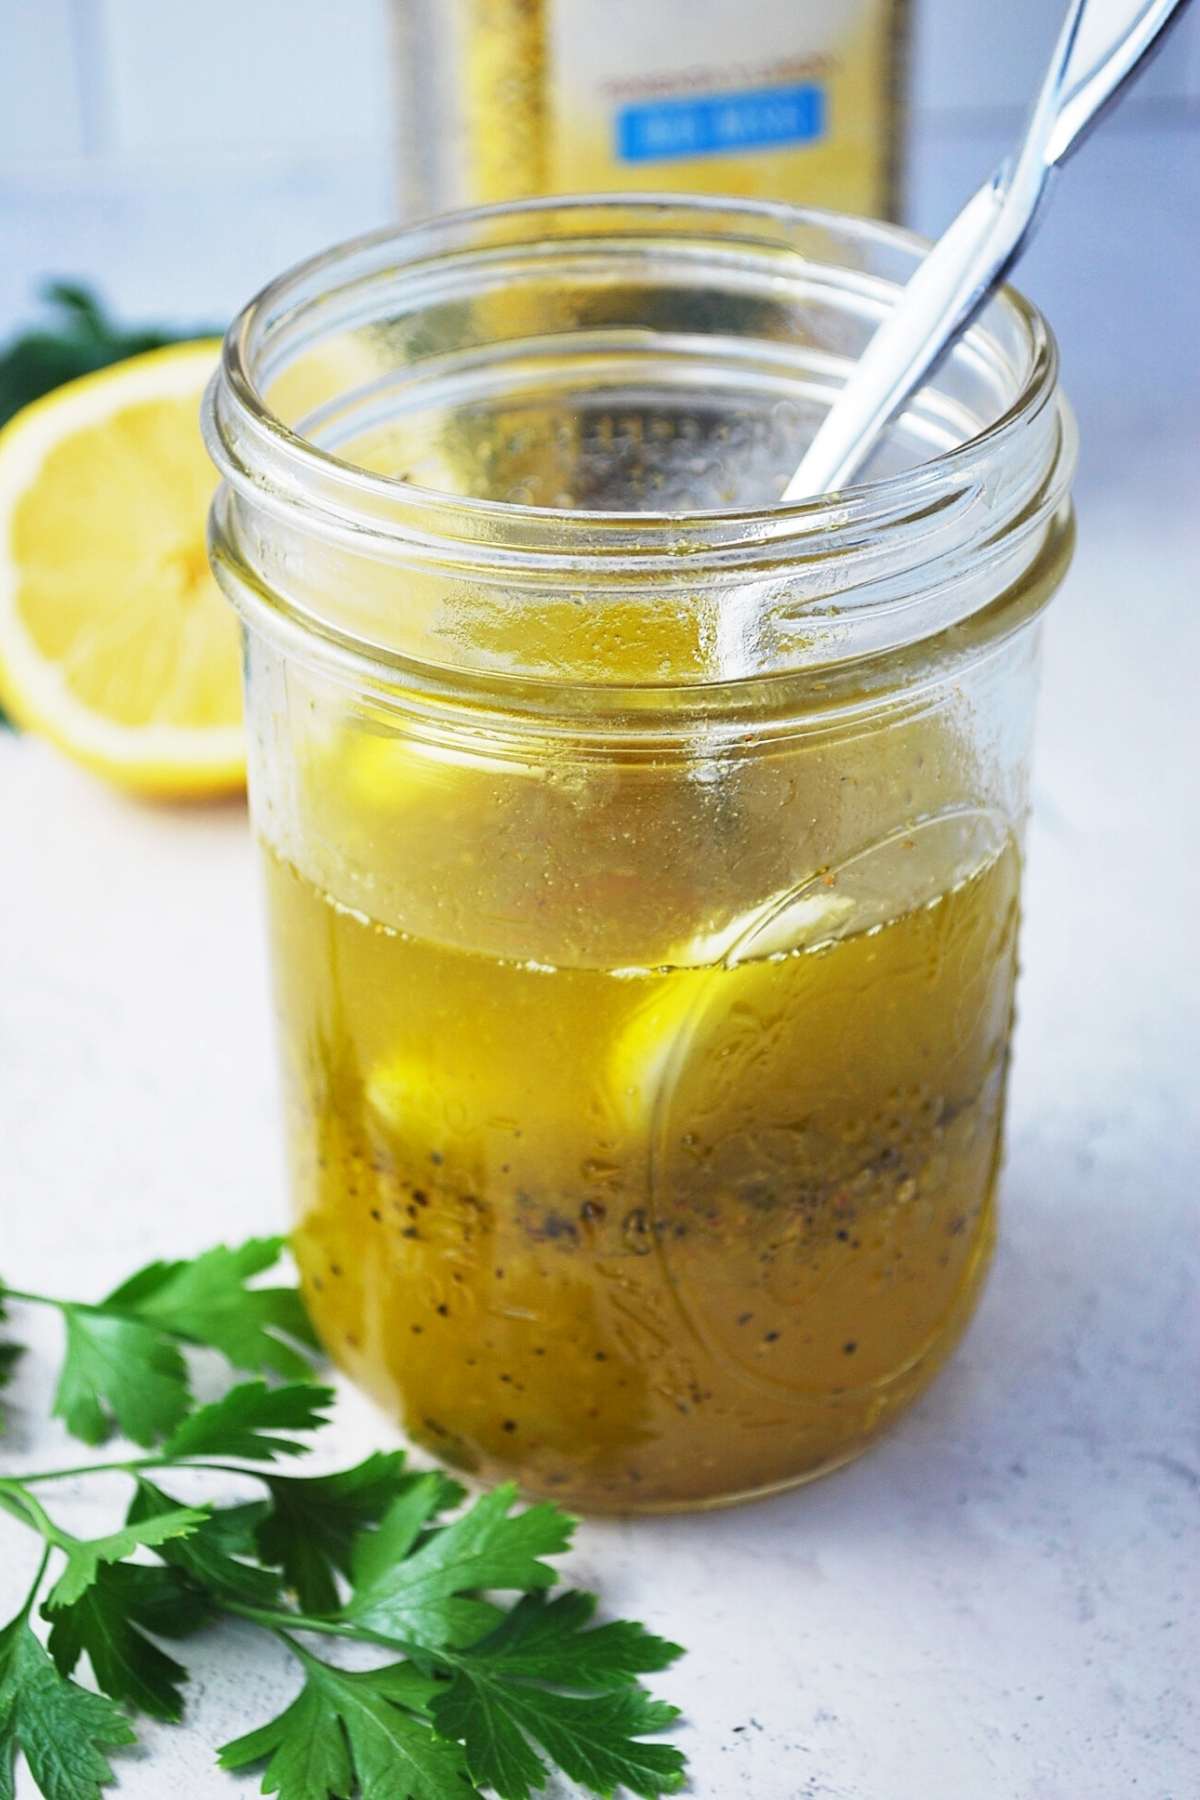 jar of lemon pepper marinade with fresh parsley and sliced lemon in the background